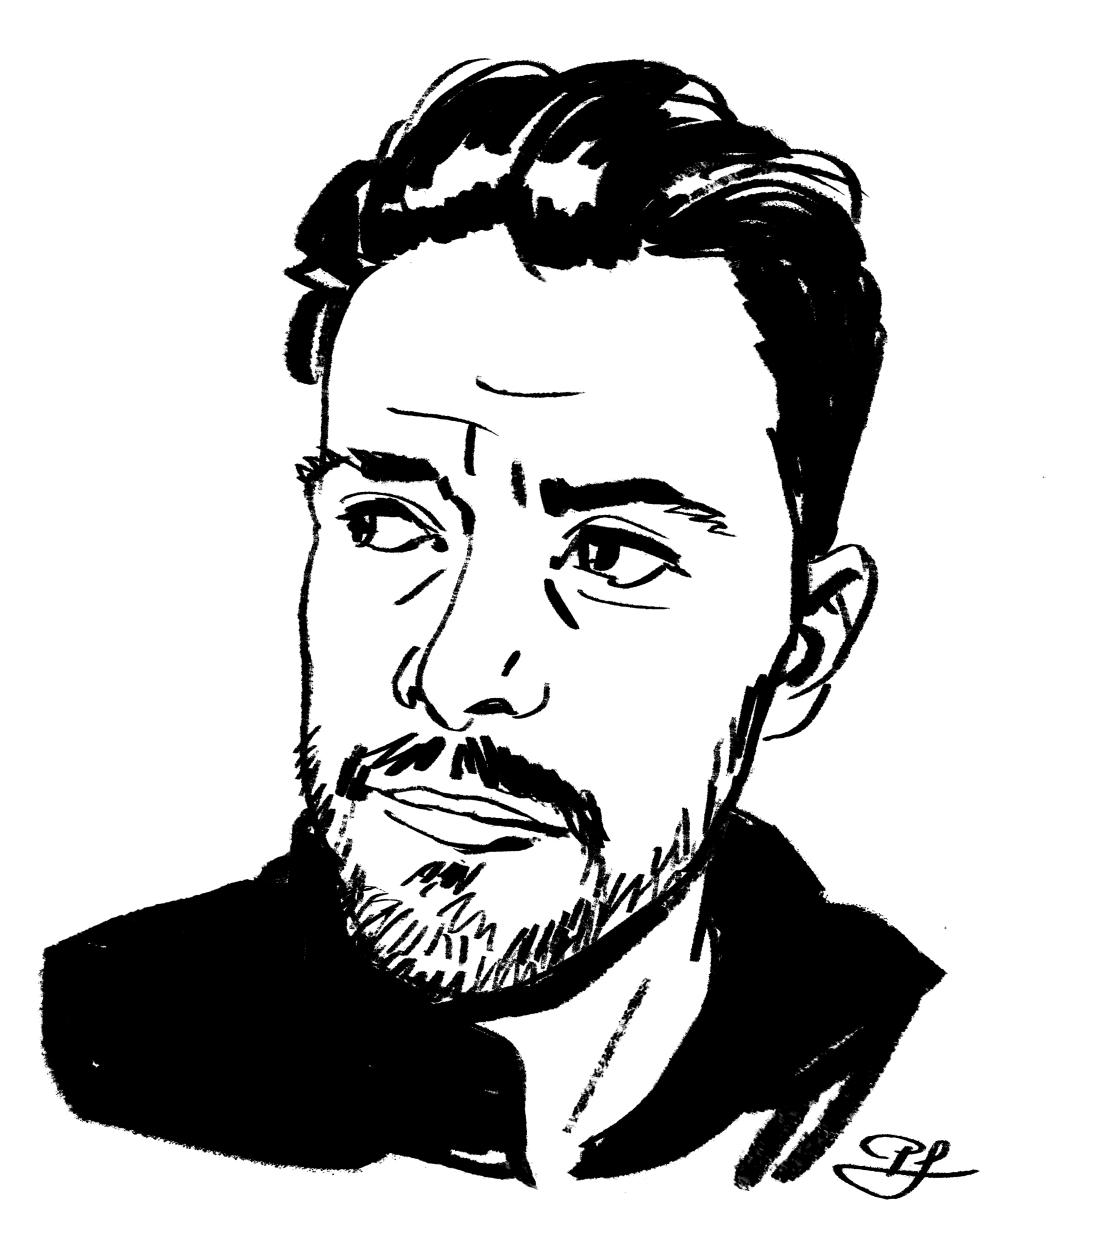 Profile picture of Zach Herring, art by Patrick Leger